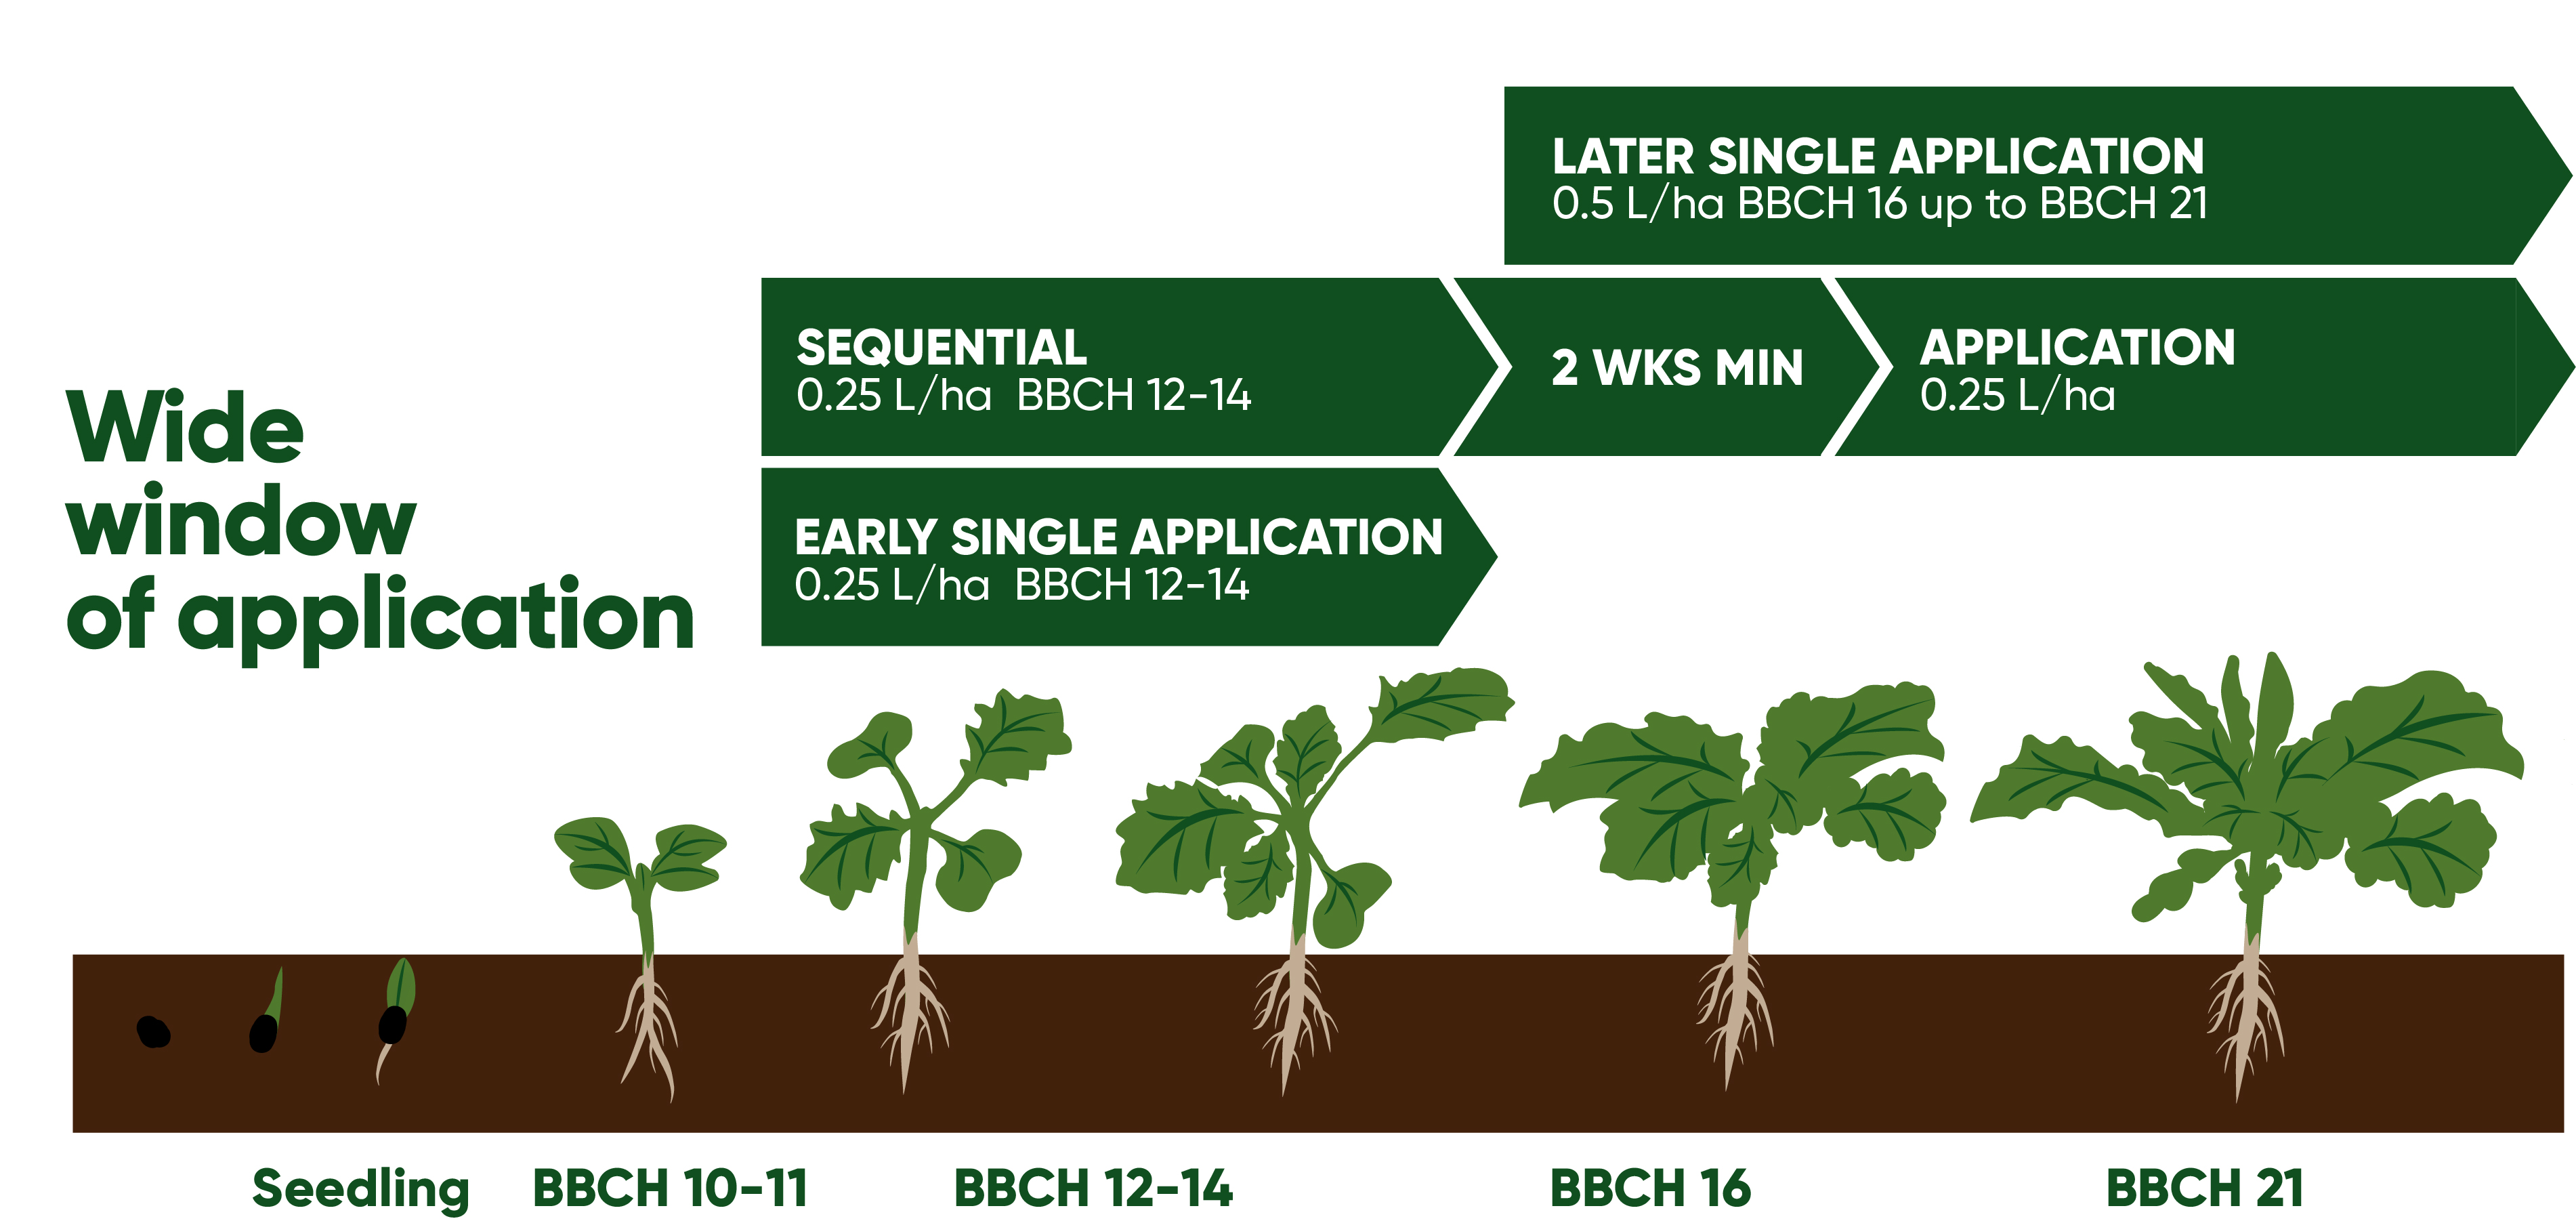 Growth stages of OSR and when to use Belkar herbicide